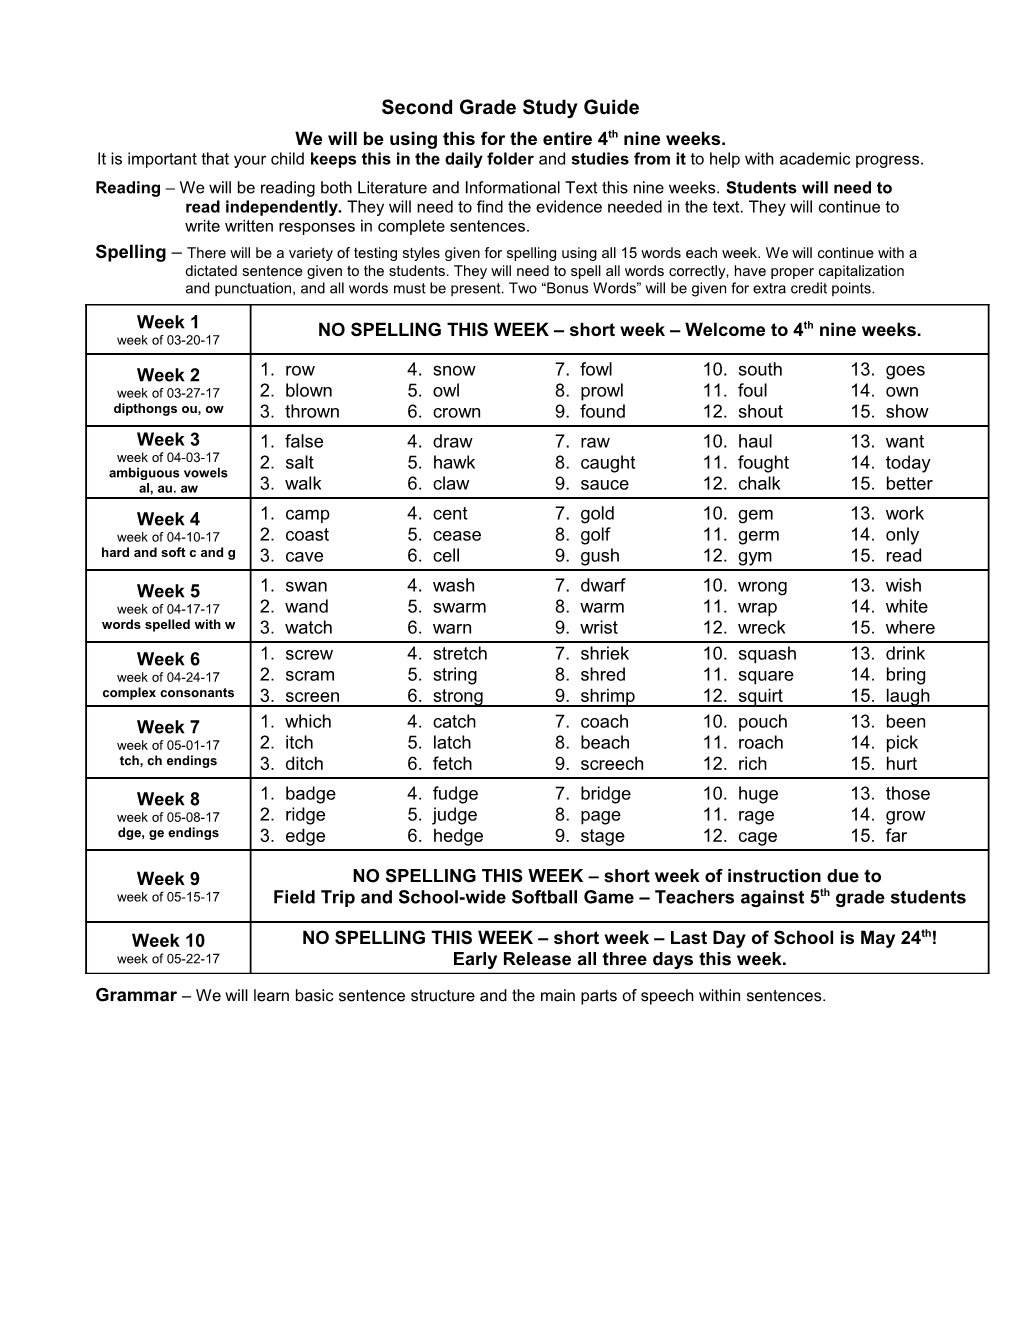 Second Grade Spelling and Vocabulary Words